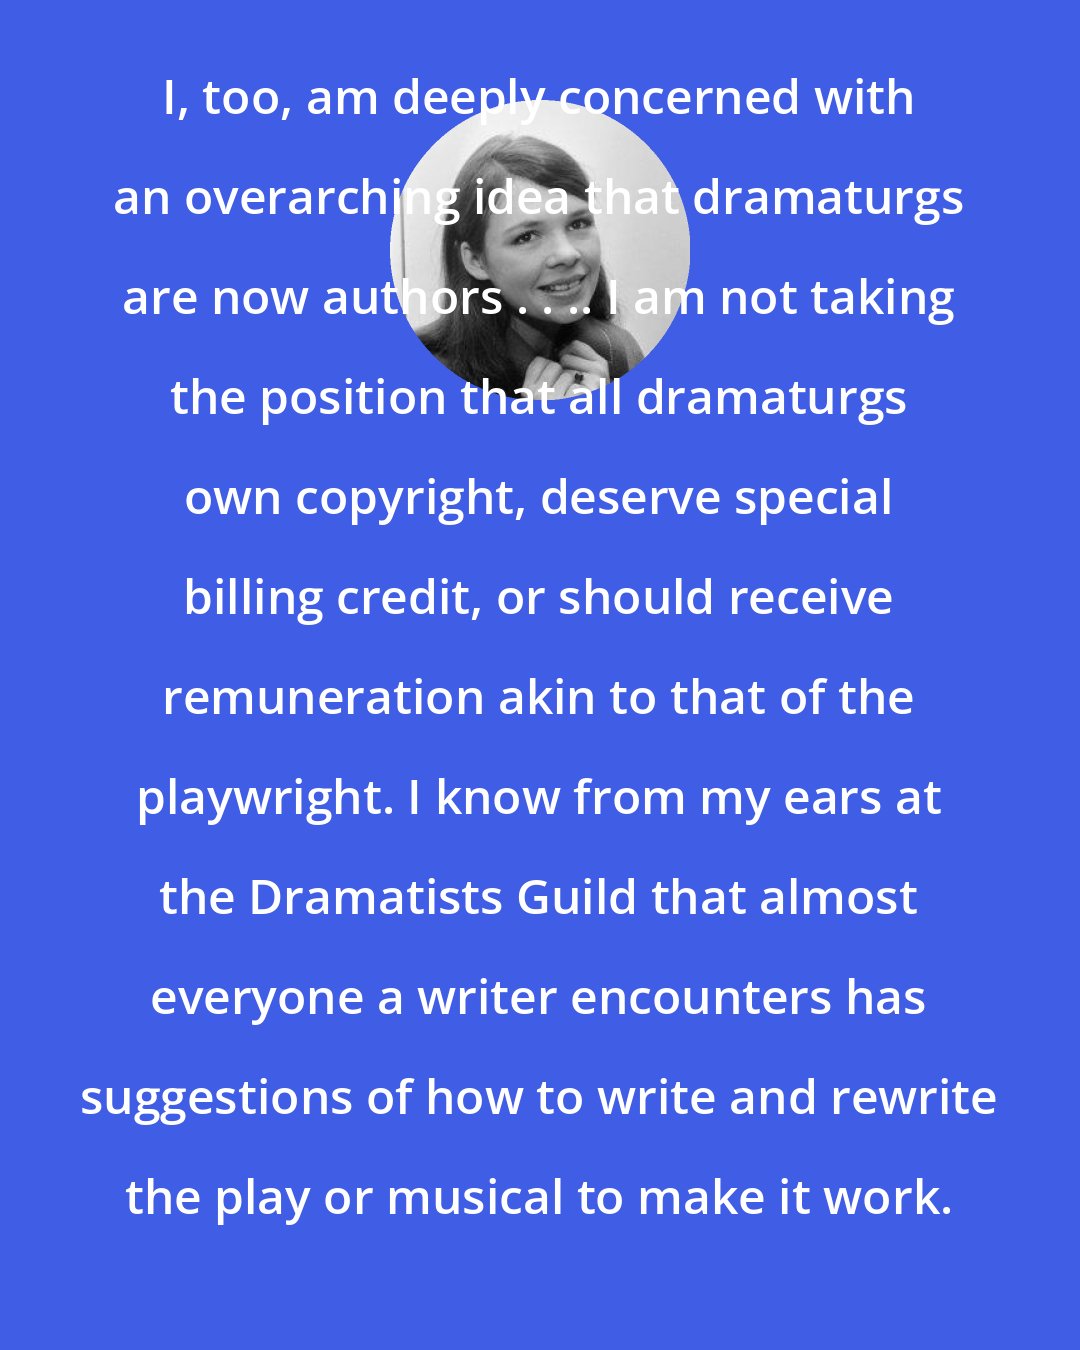 Dana Rosemary Scallon: I, too, am deeply concerned with an overarching idea that dramaturgs are now authors . . .. I am not taking the position that all dramaturgs own copyright, deserve special billing credit, or should receive remuneration akin to that of the playwright. I know from my ears at the Dramatists Guild that almost everyone a writer encounters has suggestions of how to write and rewrite the play or musical to make it work.